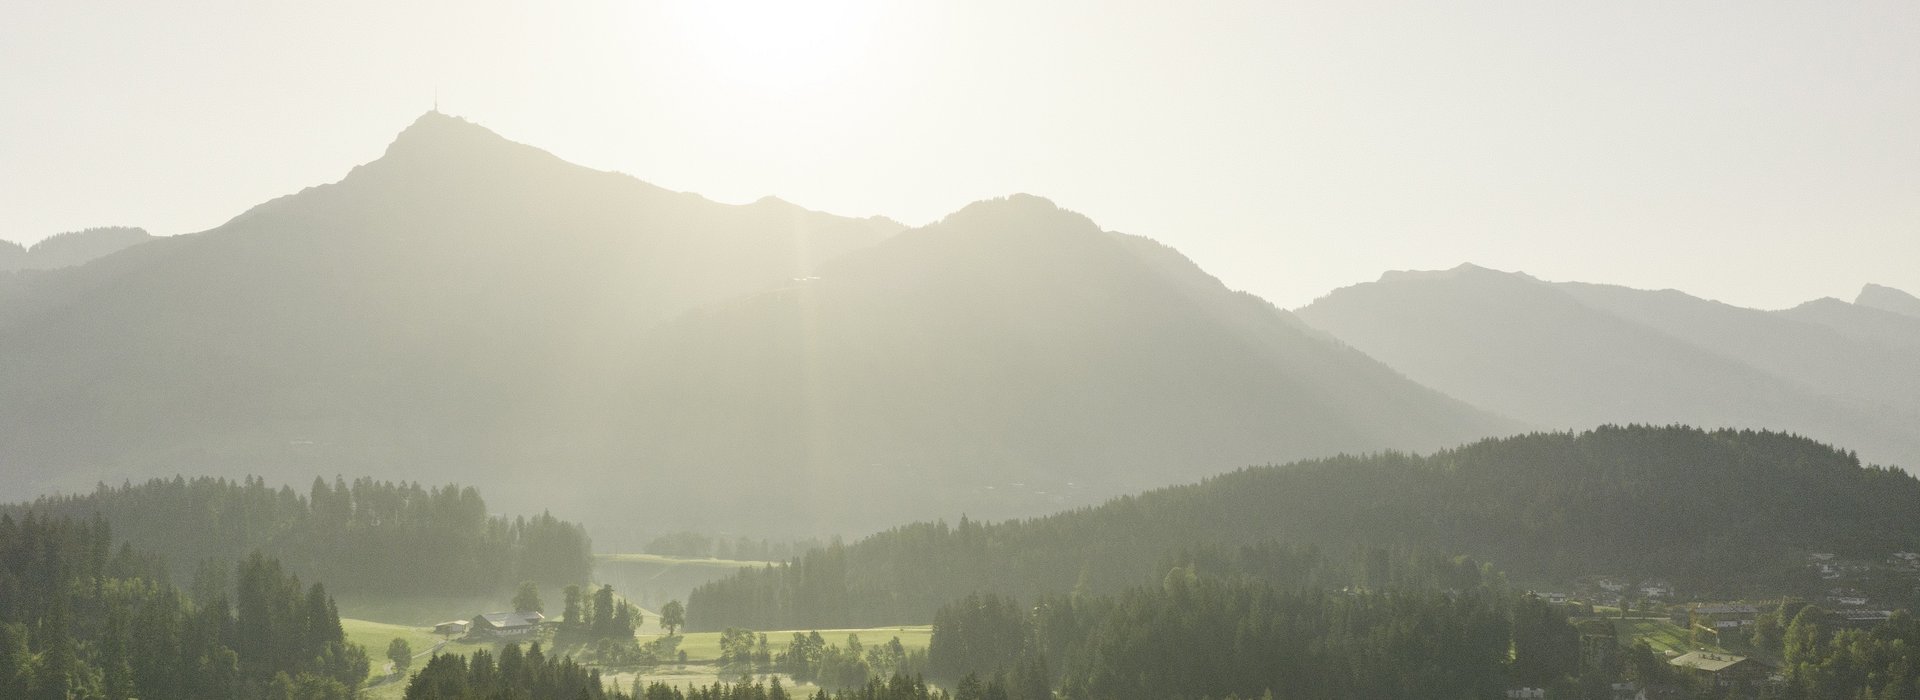 Morning landscape with view of Schwarzsee